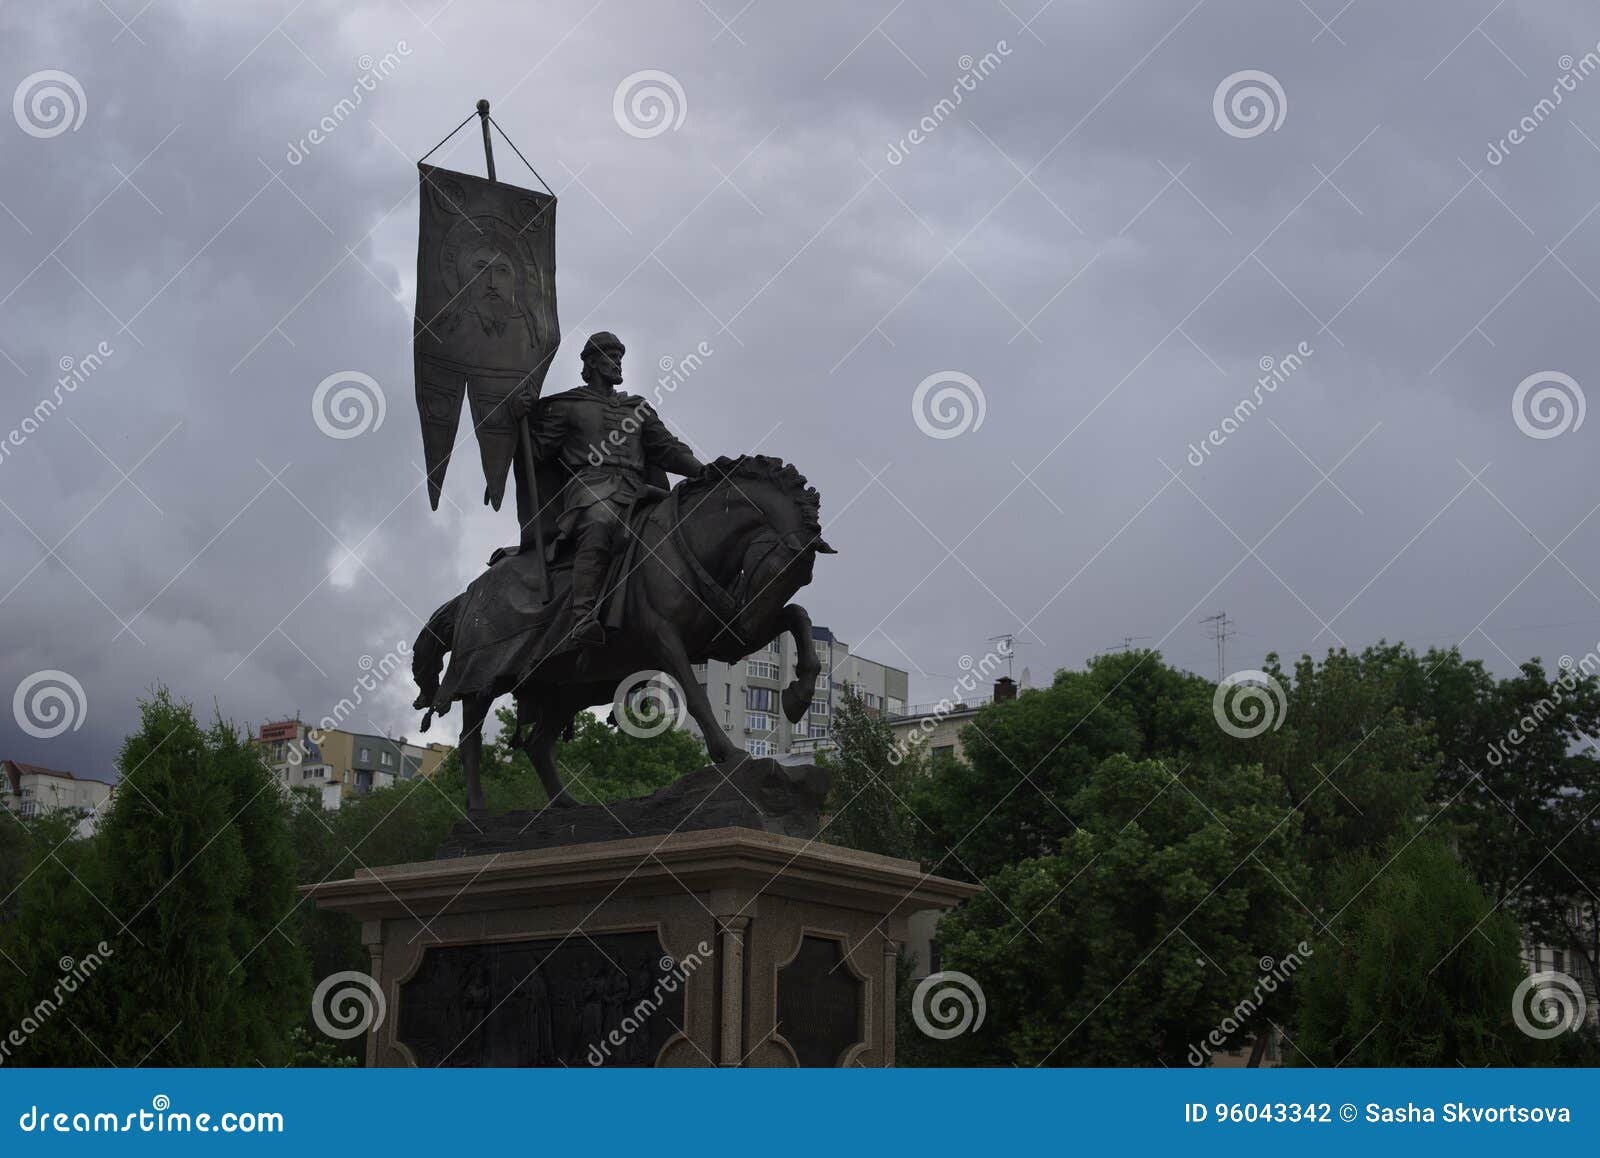 monument to the founder of samara, the city where the world cup will be held